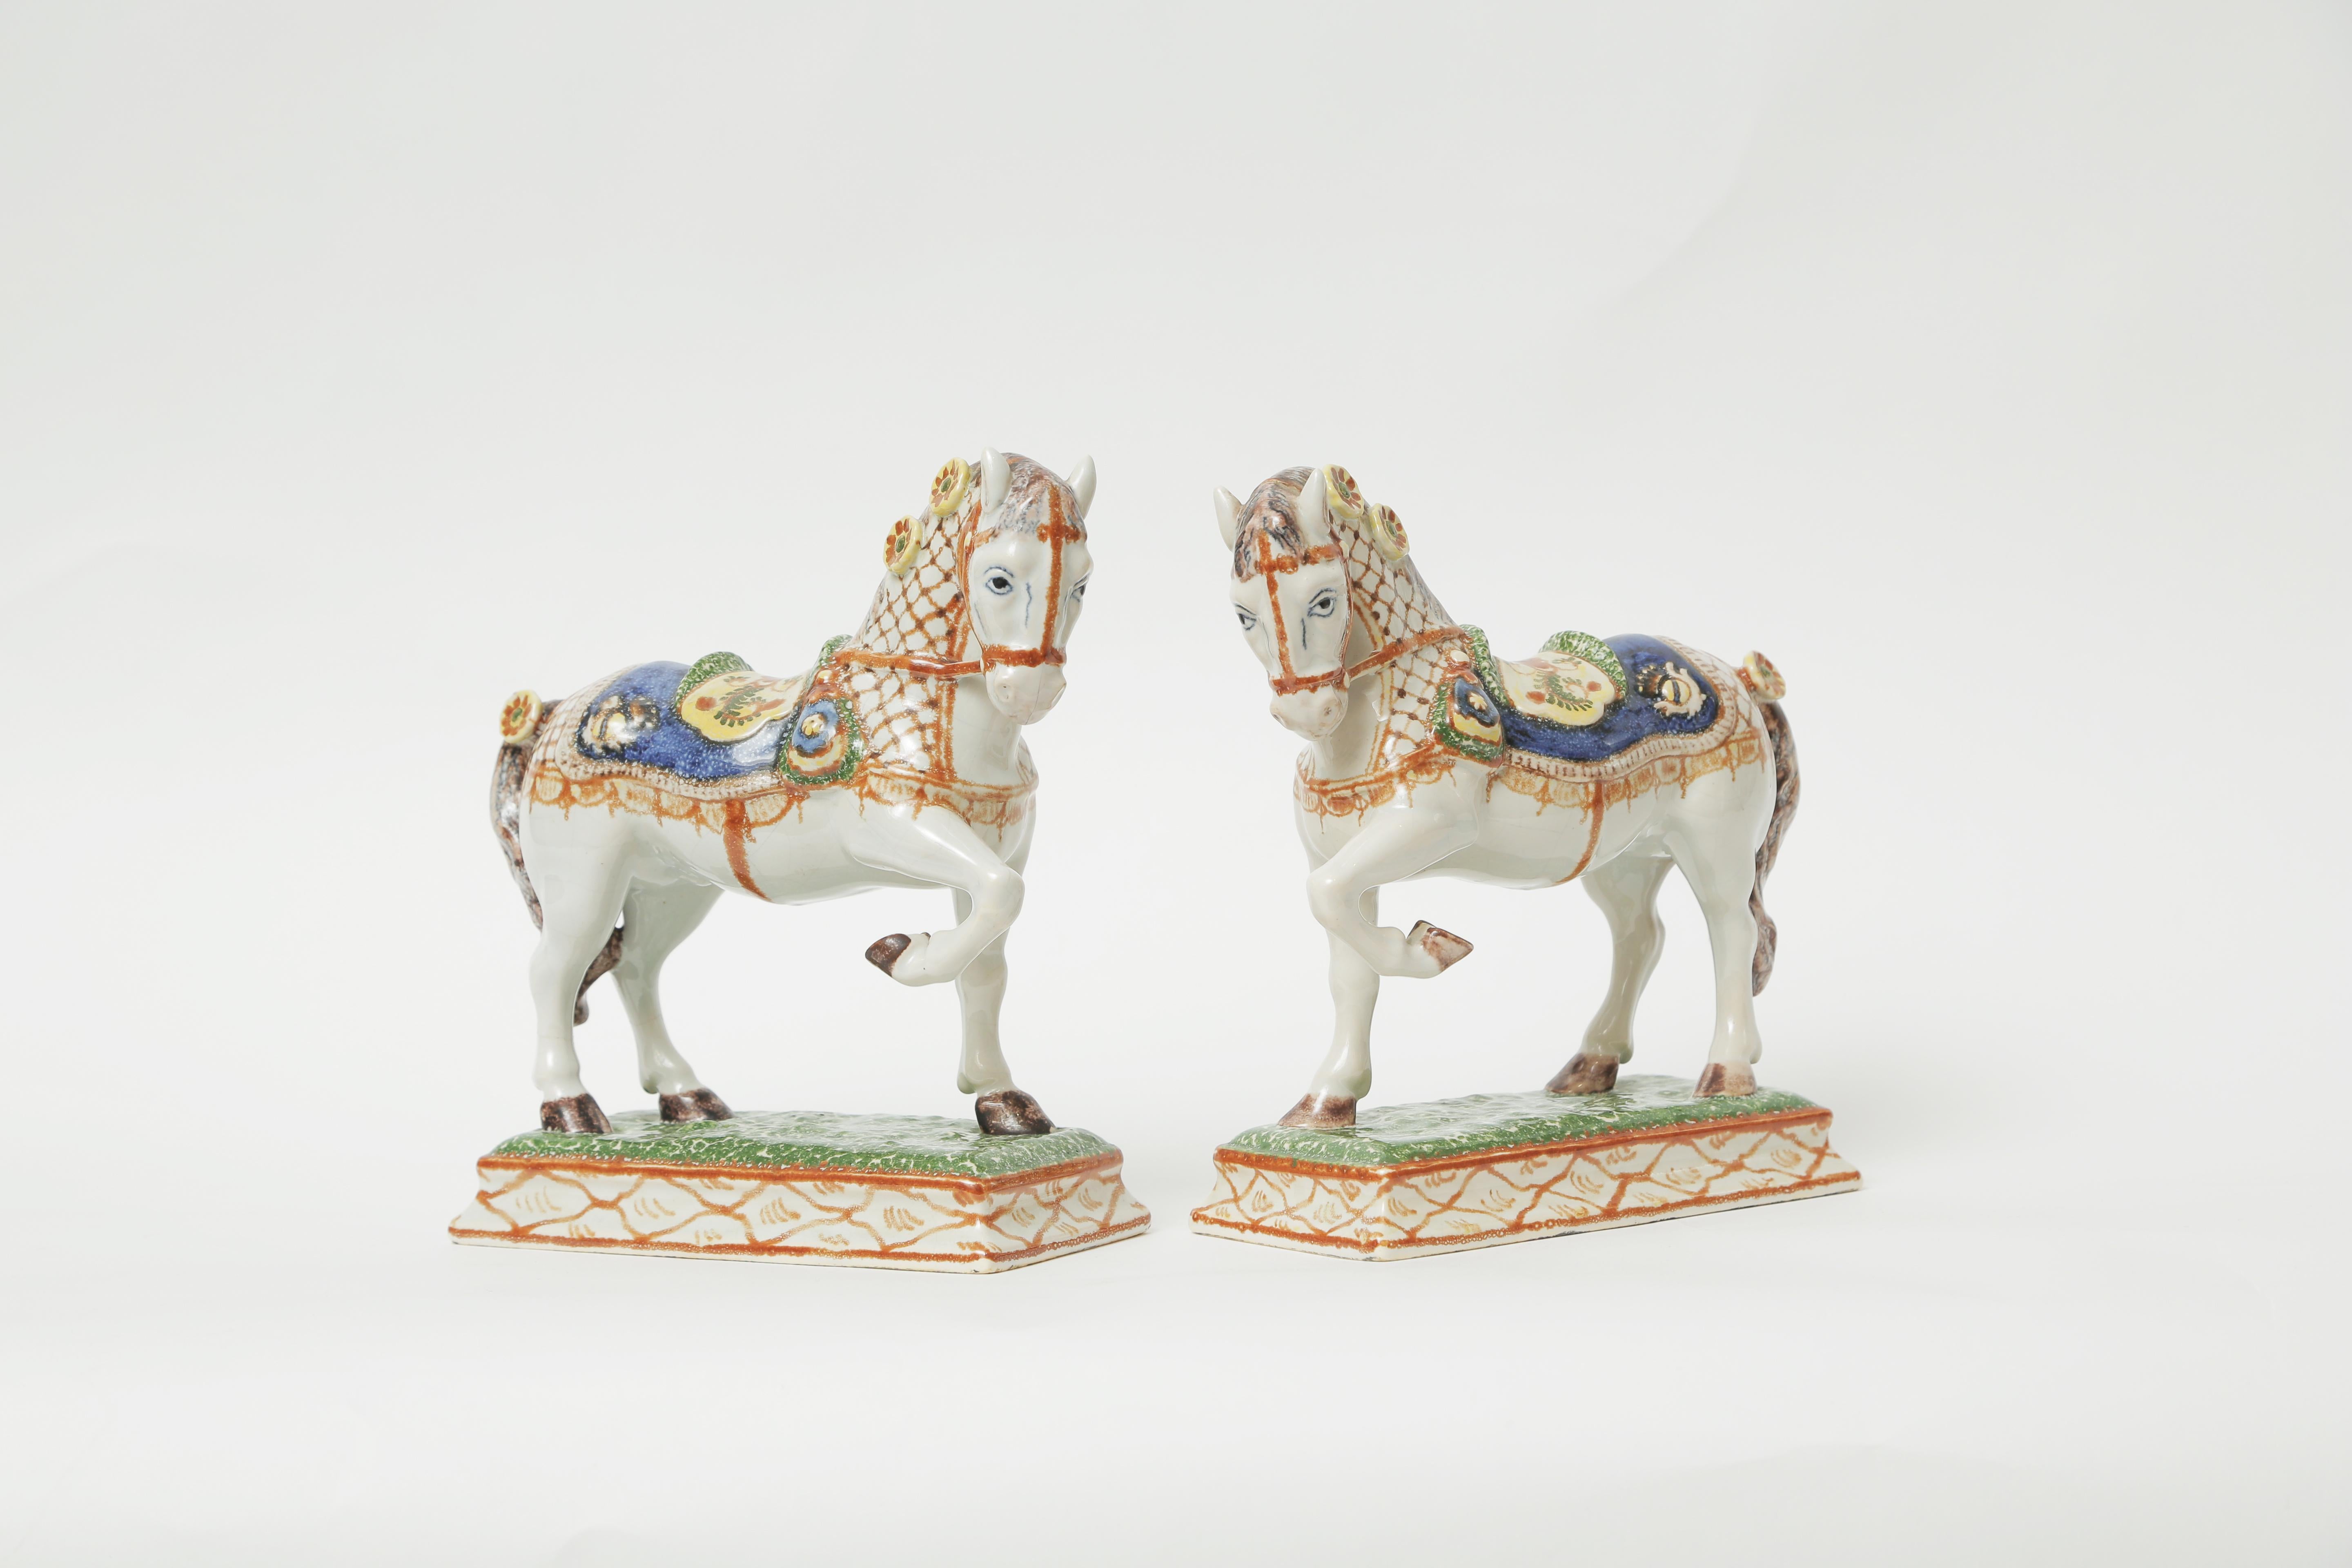 A fine and rare pair of 19th century French hand painted soft paste porcelain Ardennais horses. A well decorated opposing pair of horse sculptures on colorful decorated plinths. The Ardennais or Ardennes is one of the oldest breeds of draft horse,